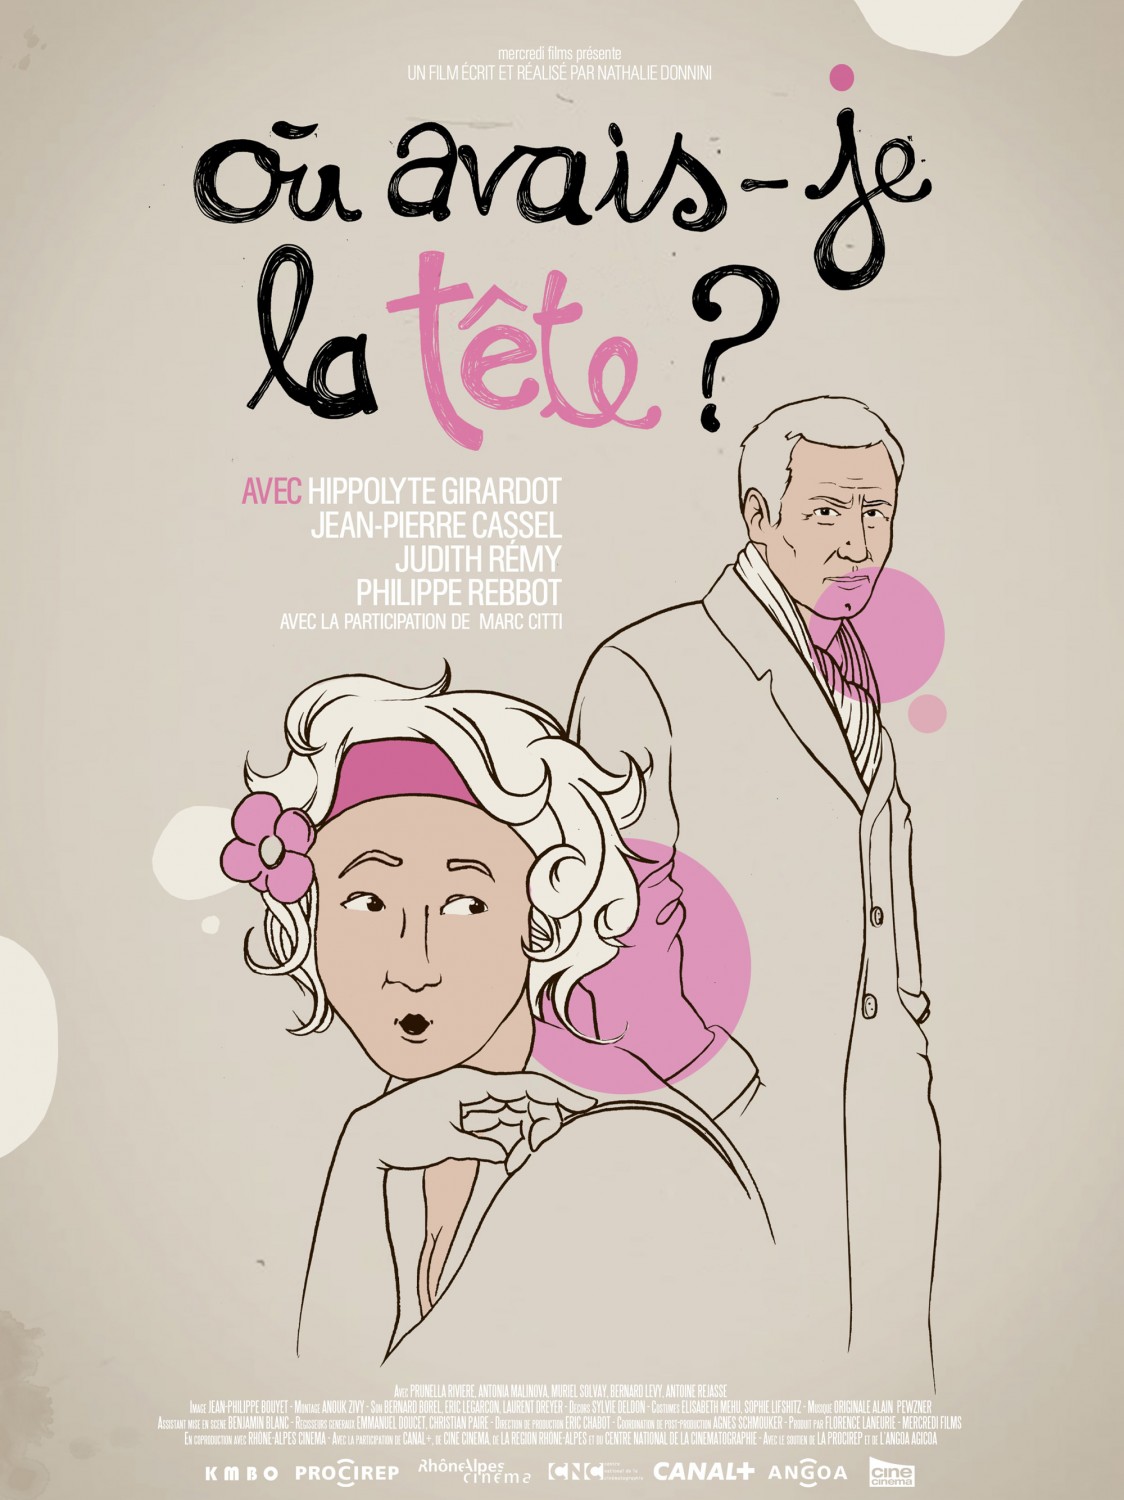 Extra Large Movie Poster Image for Où avais-je la tête? (#3 of 3)